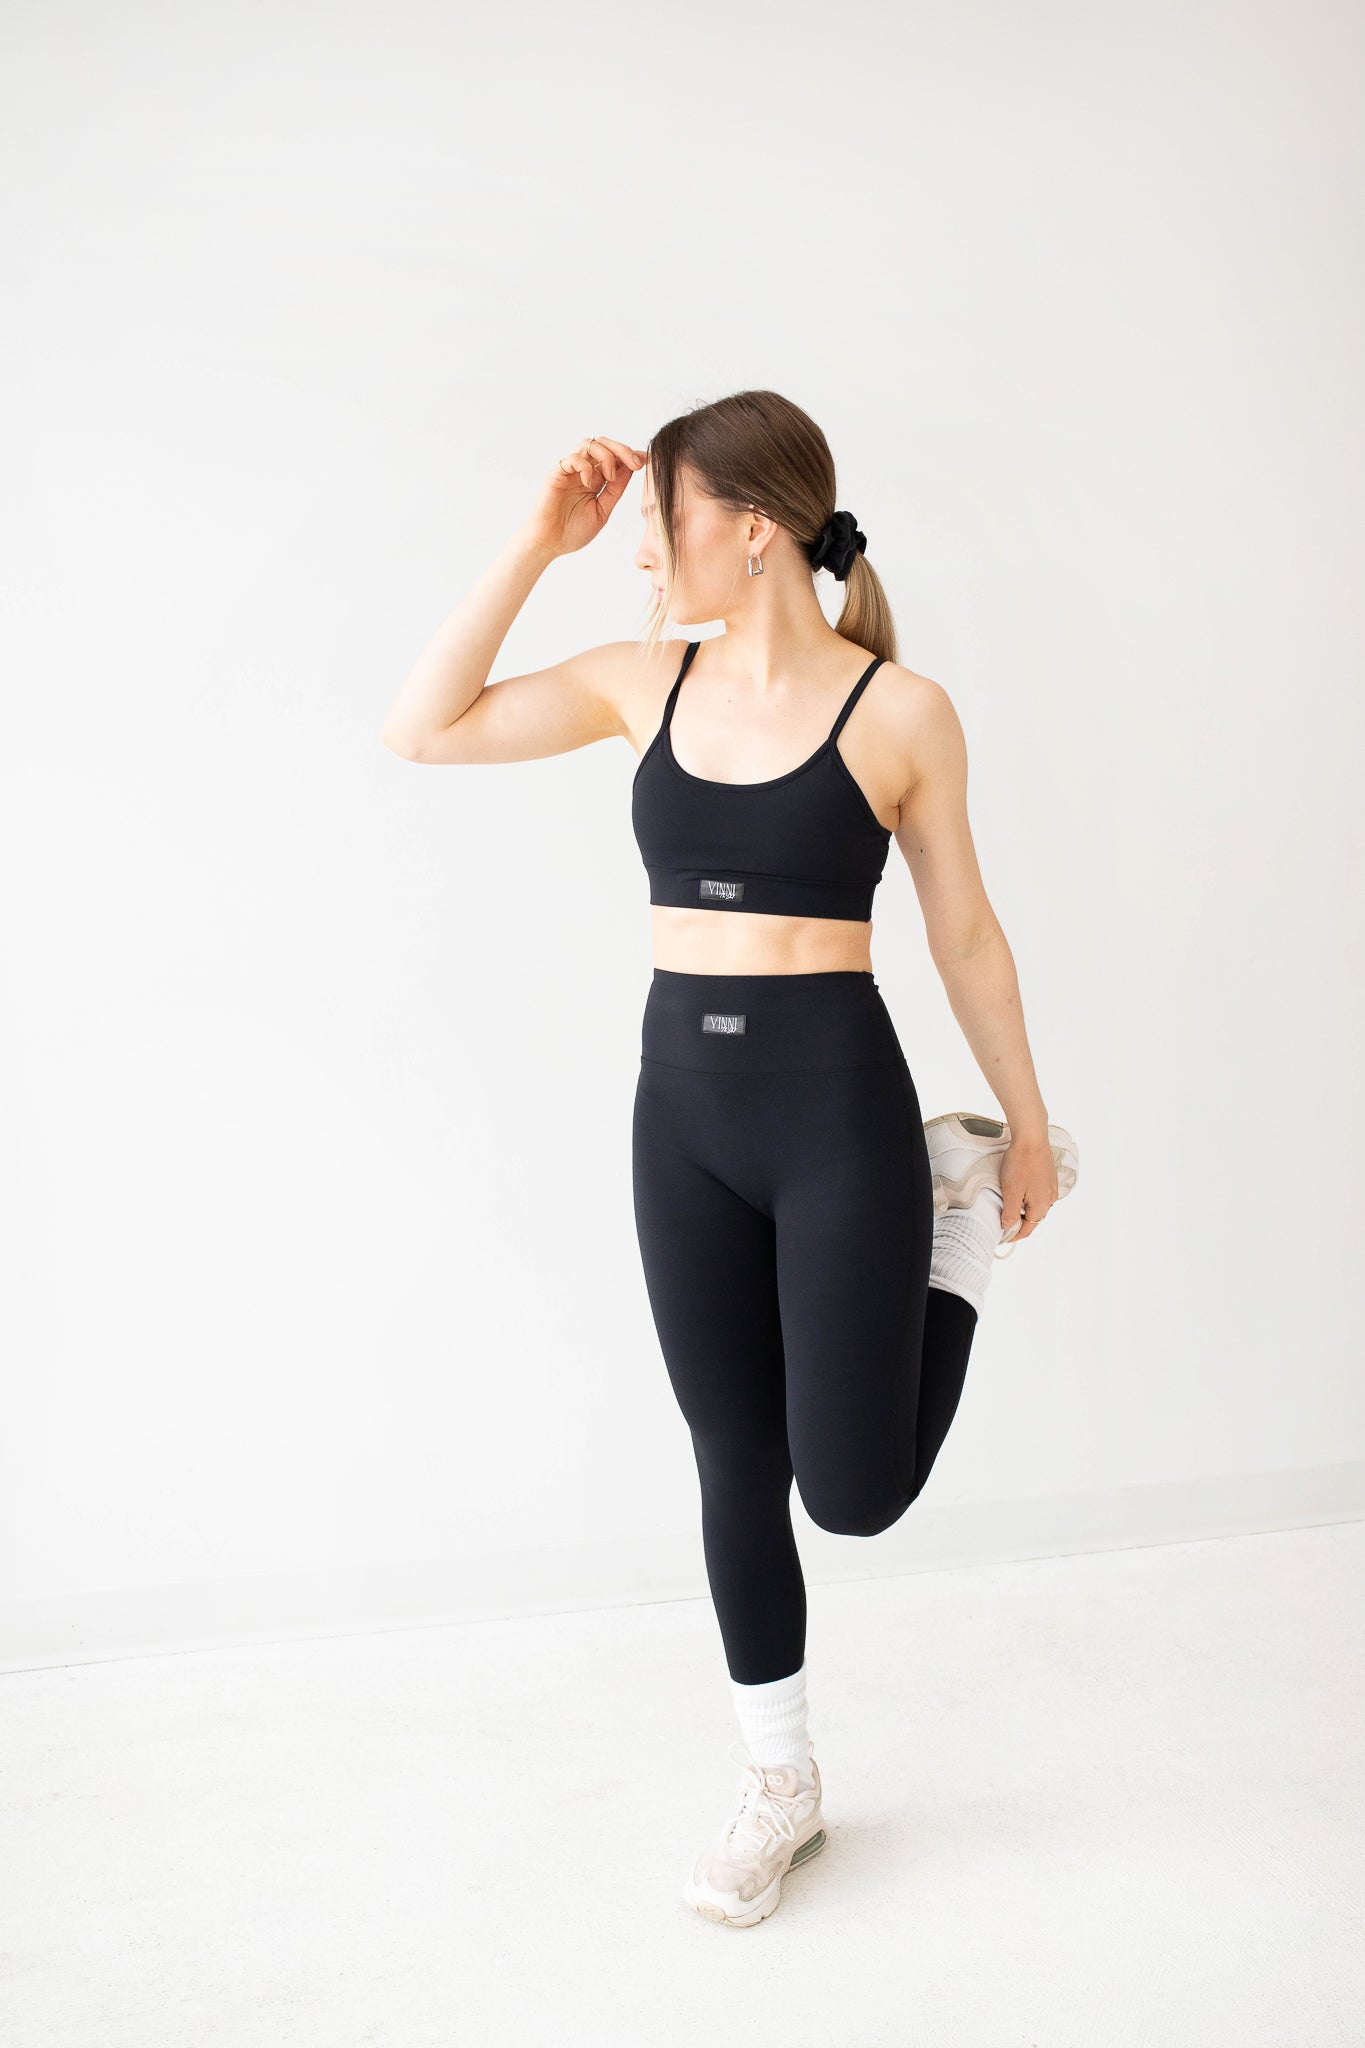 BLACK TIGHTS FOR WOMEN FOR WORKOUT